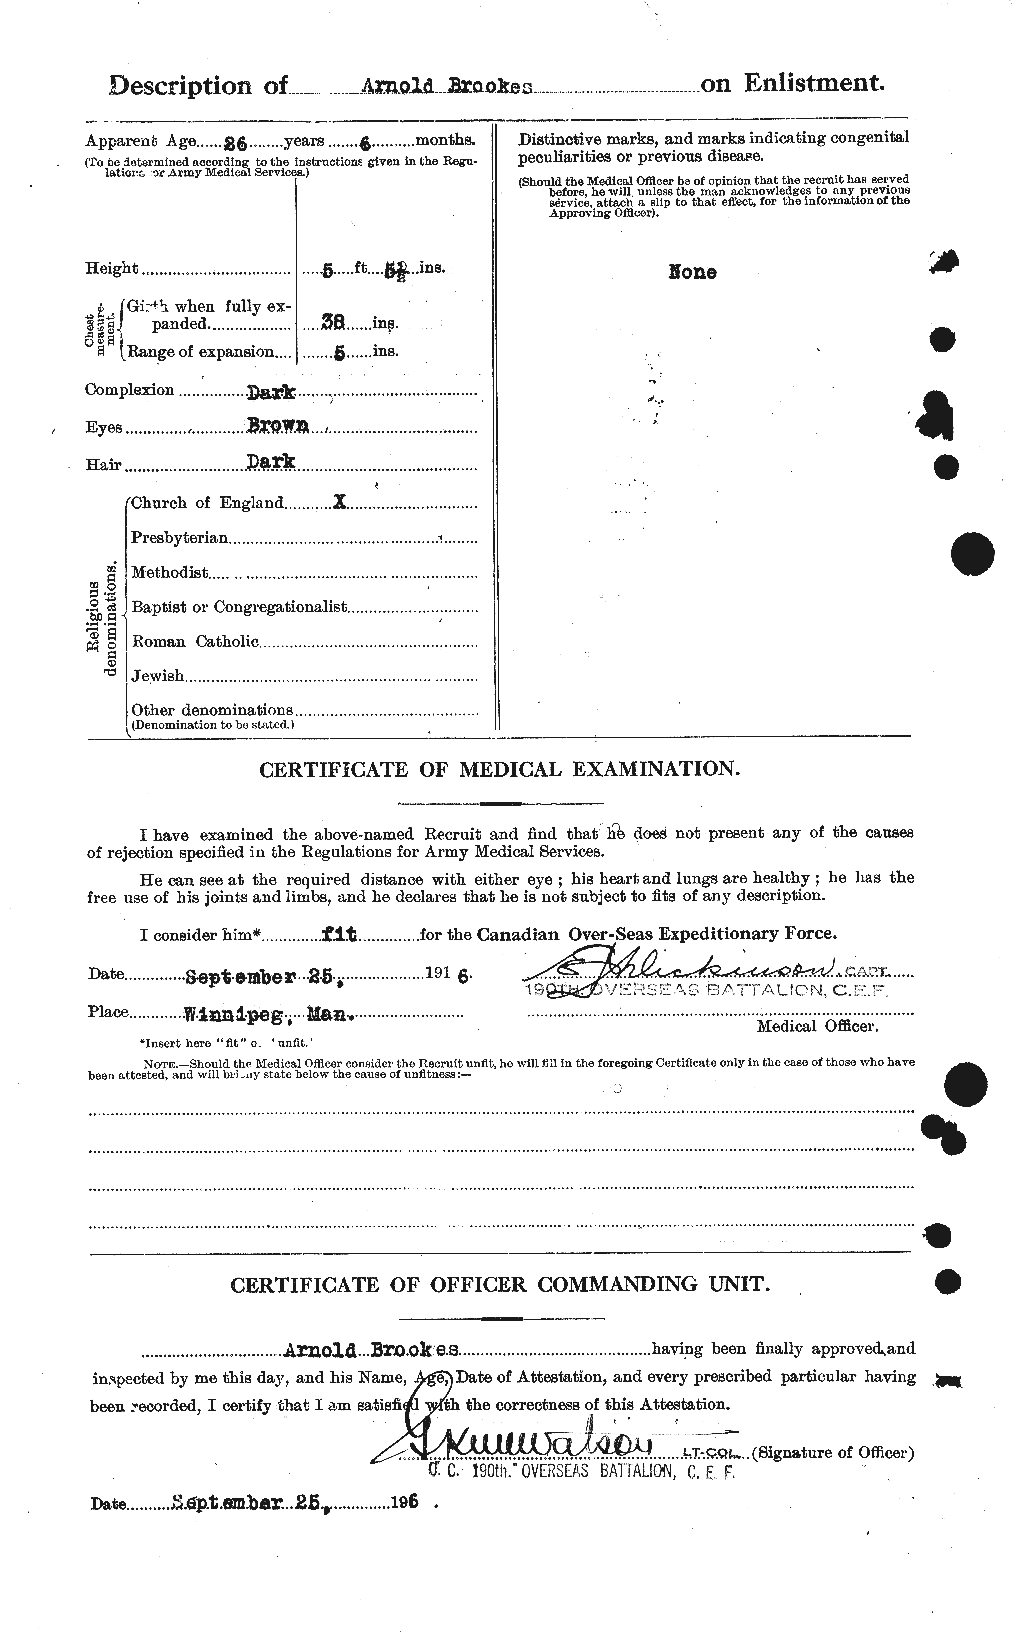 Personnel Records of the First World War - CEF 263066b